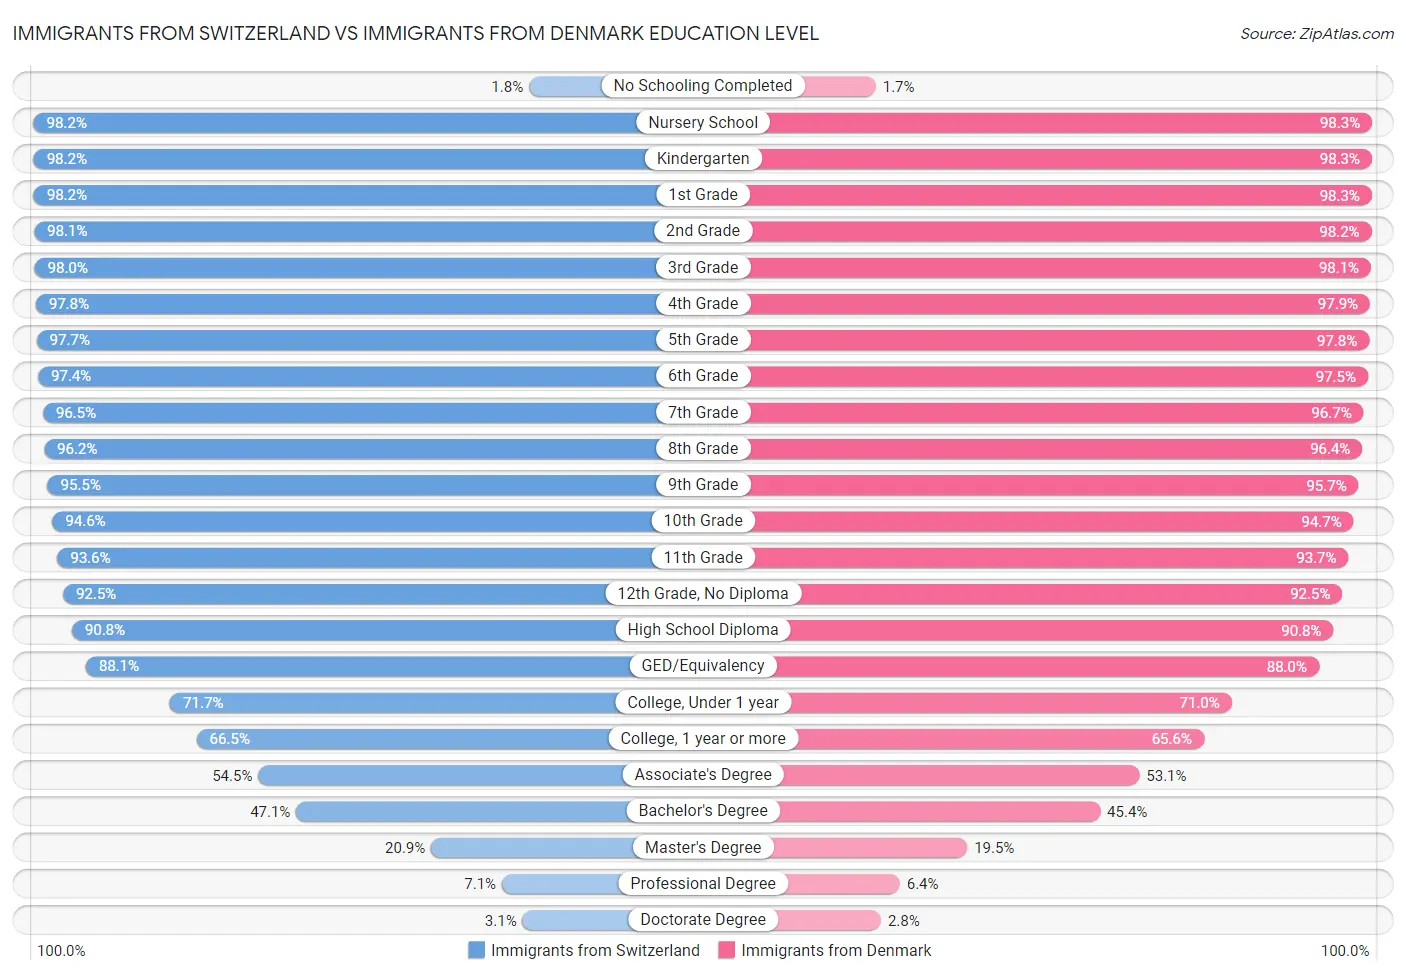 Immigrants from Switzerland vs Immigrants from Denmark Education Level